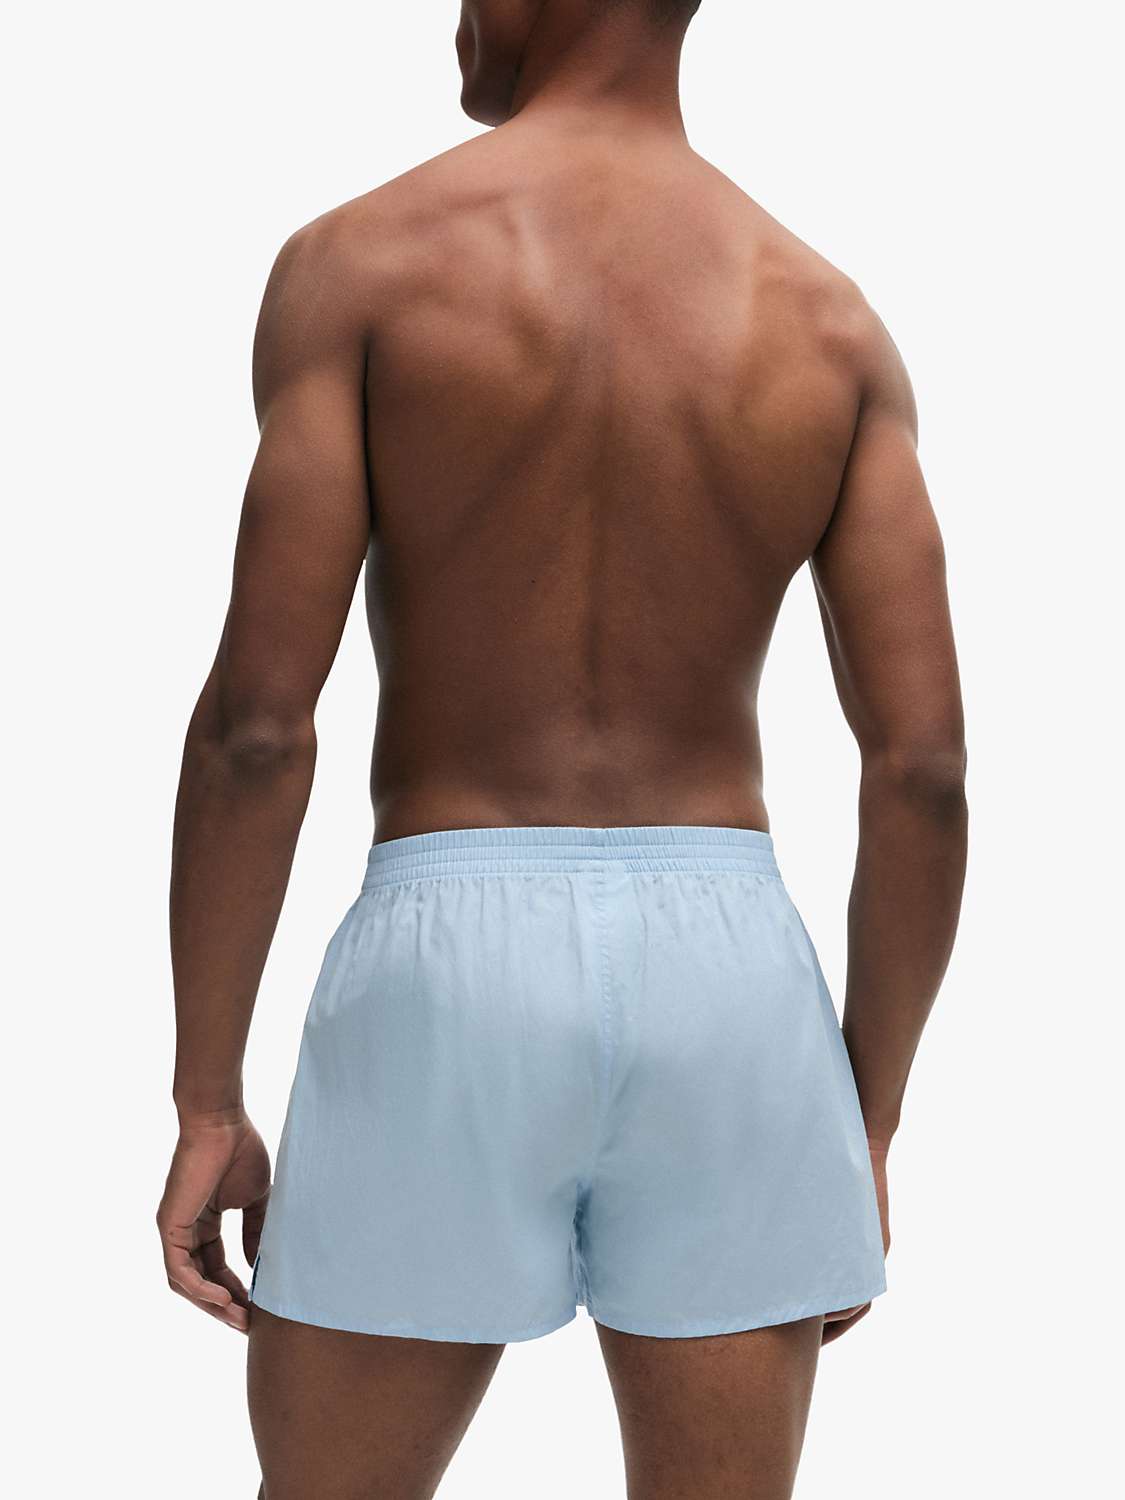 Buy BOSS Plain and Check Cotton Boxer Shorts, Pack of 2, Dark Blue/Light Blue Online at johnlewis.com